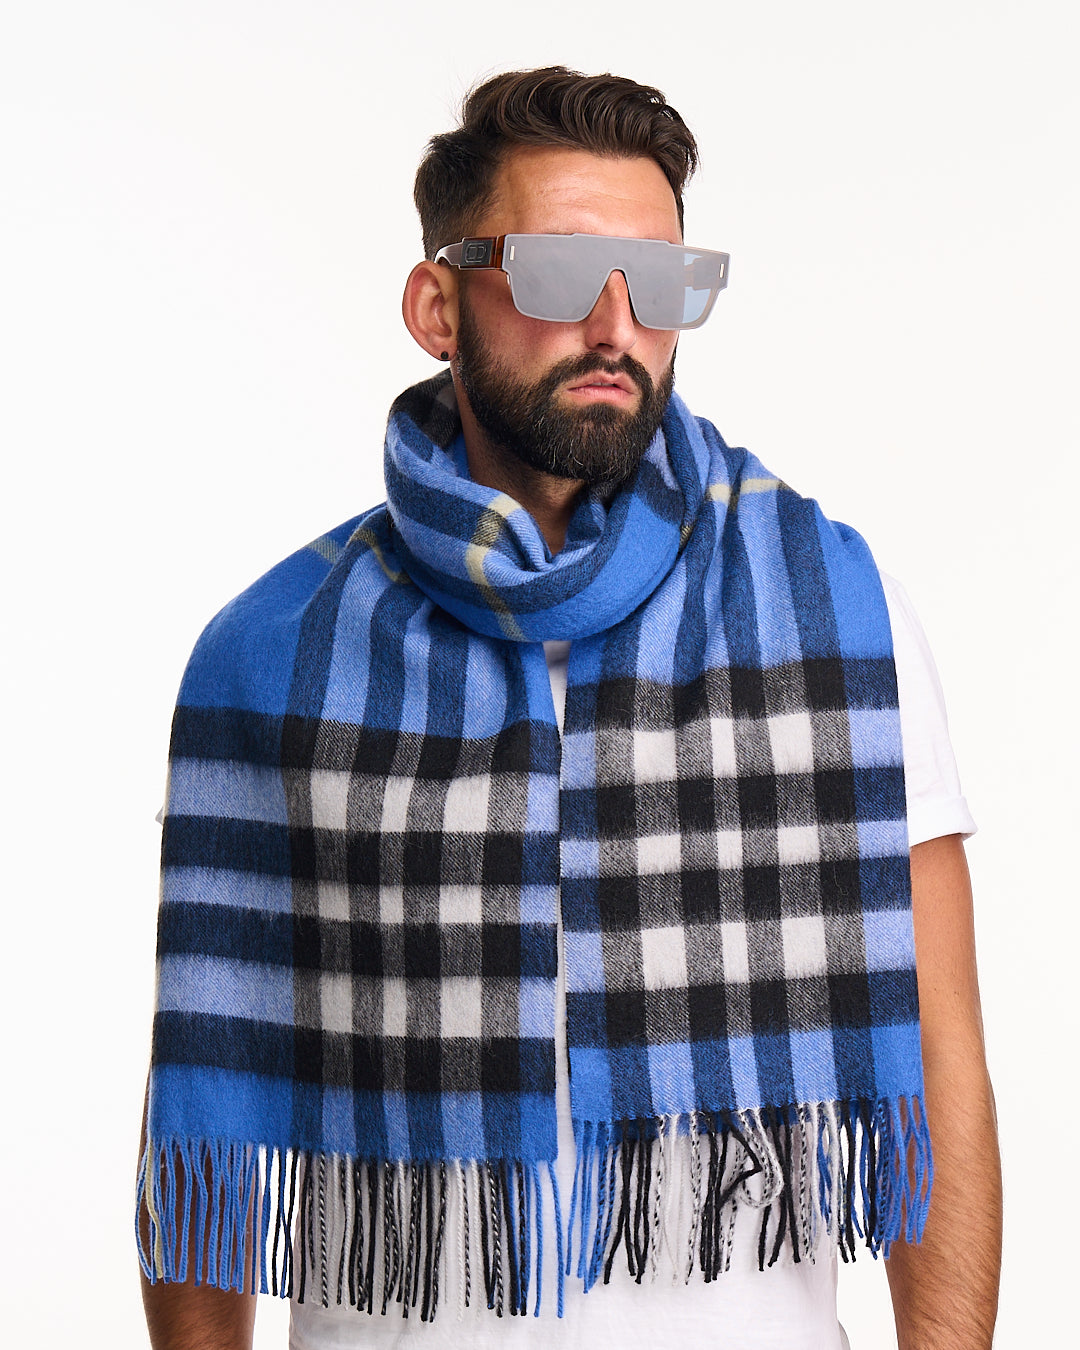 New Season, New Style Fresh Picks From The Latest Designer Scarf Collection